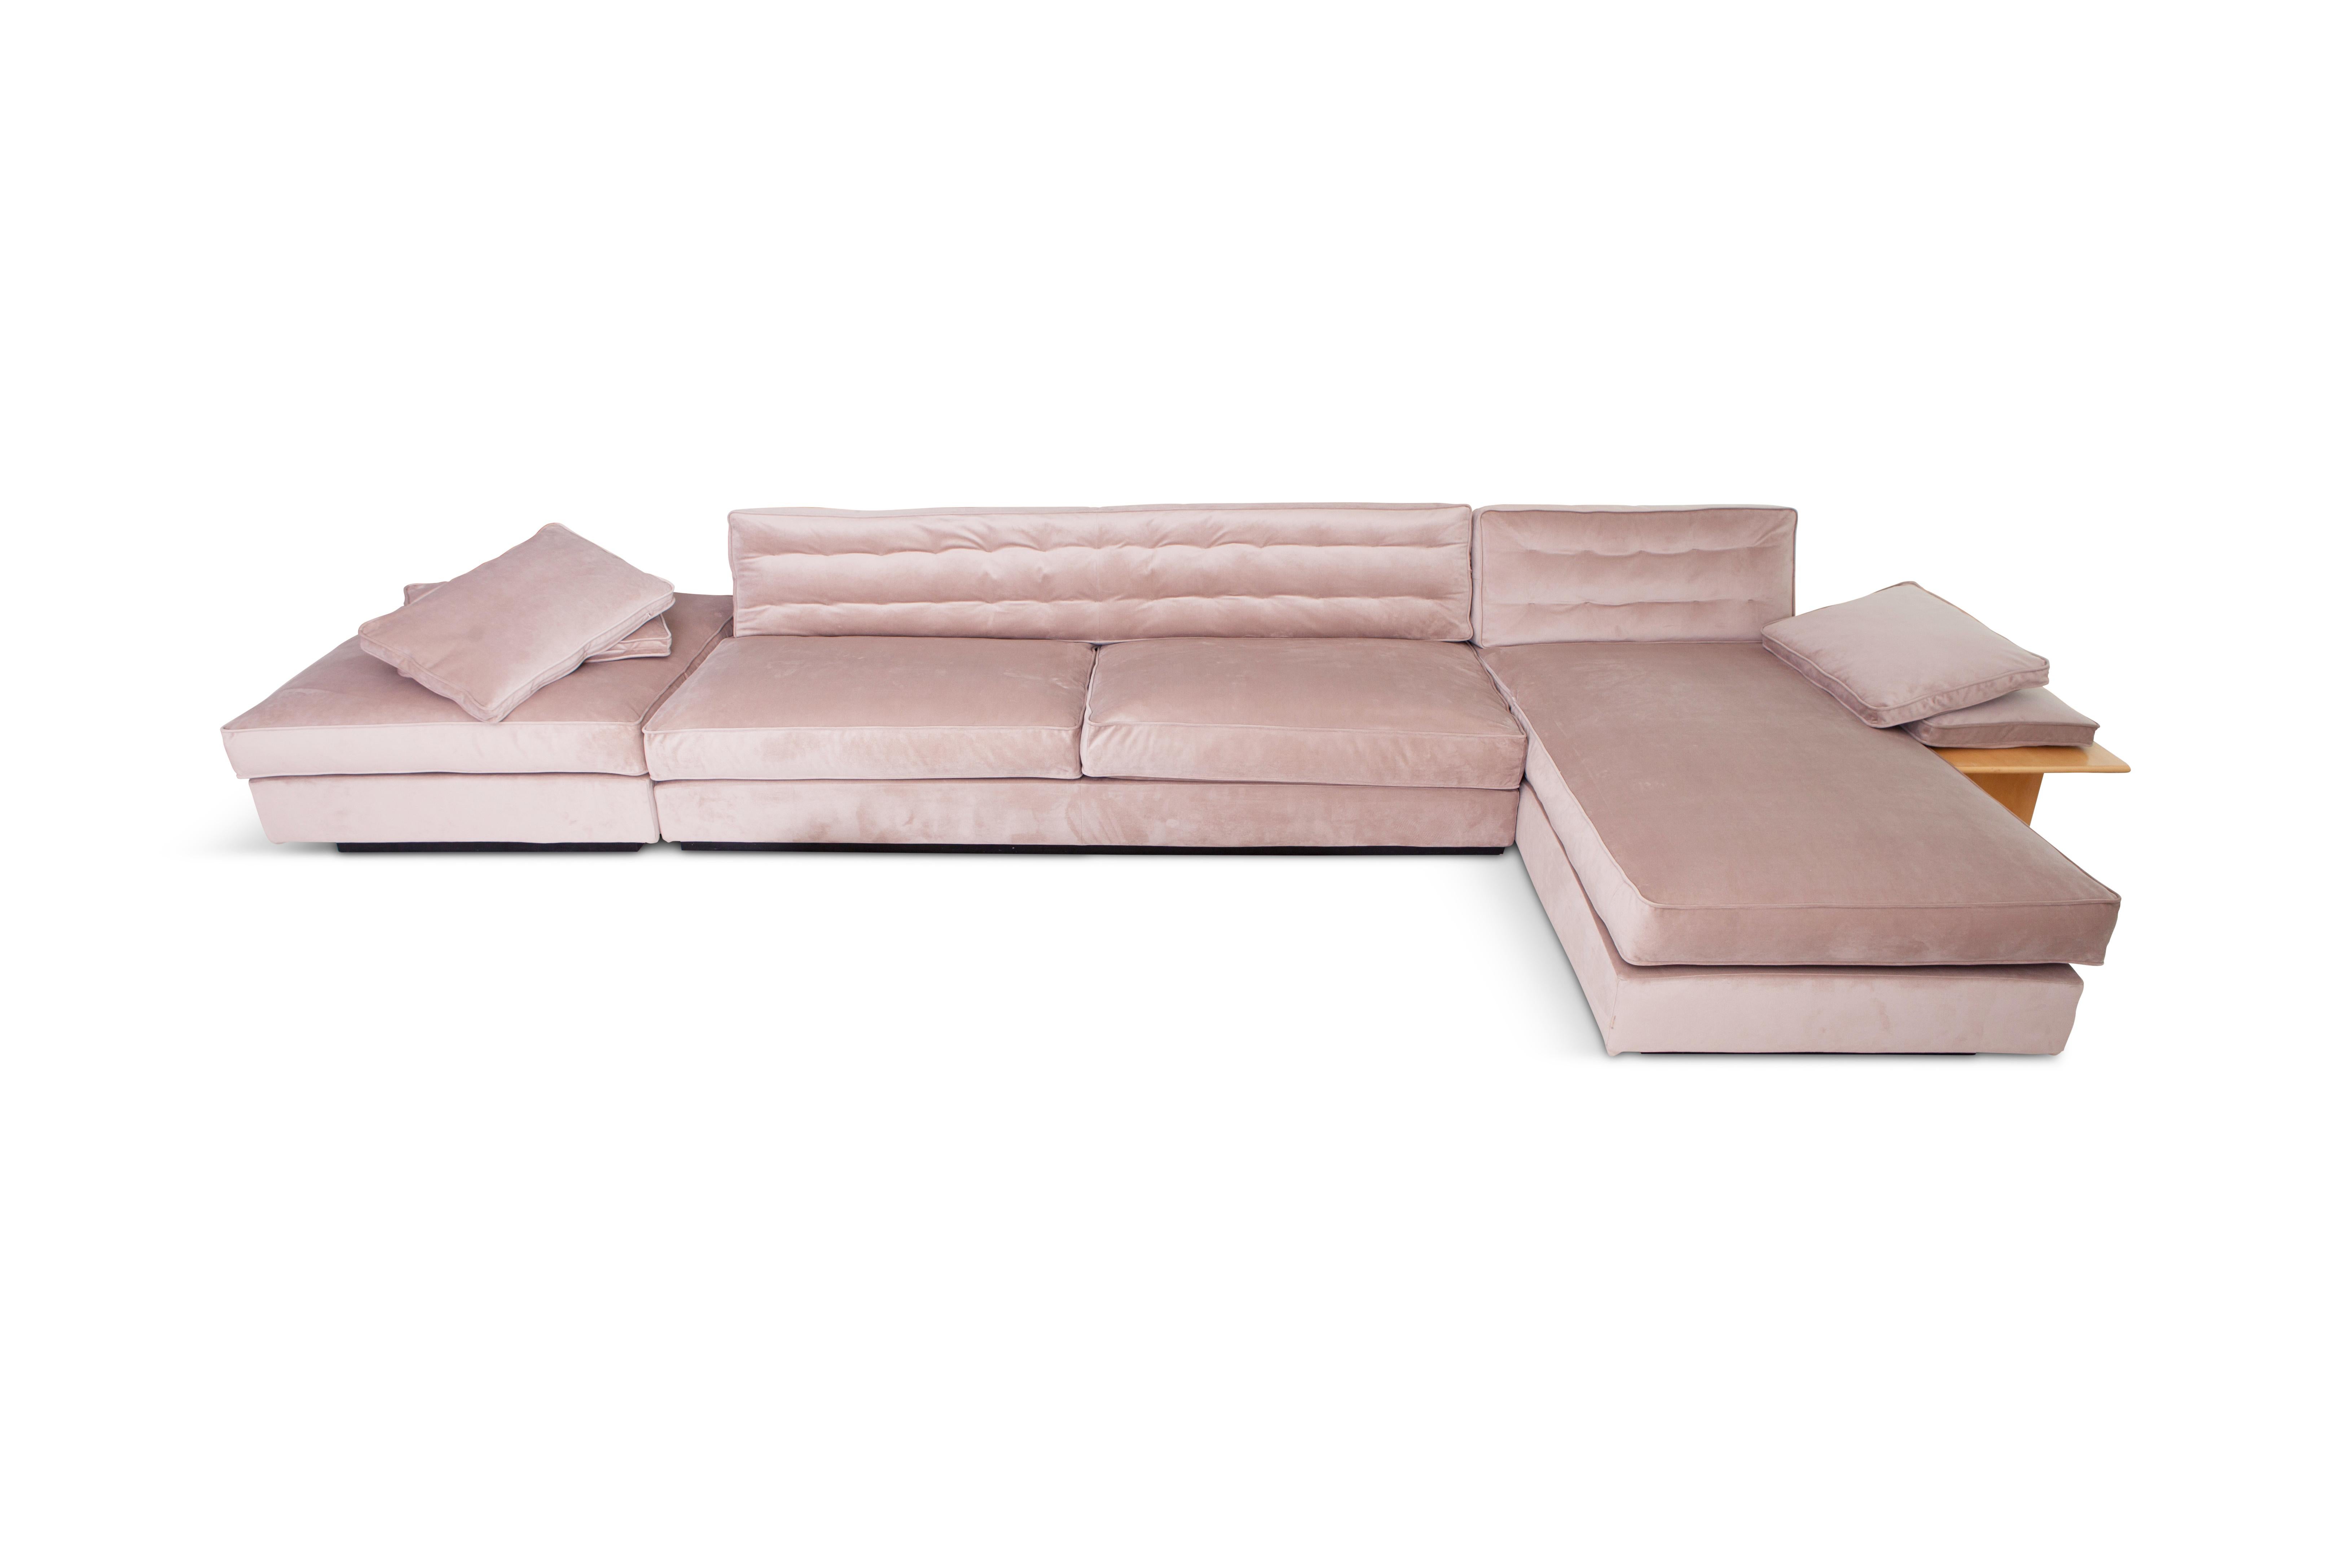 Italian sofa by Antonello Mosca for the Royal series produced by Giorgetti in a soft pink / nude velvet upholstery. The Royal series is a modular made-to-measure system, allowing everyone to create his or her own “conversation” area. Therefore every